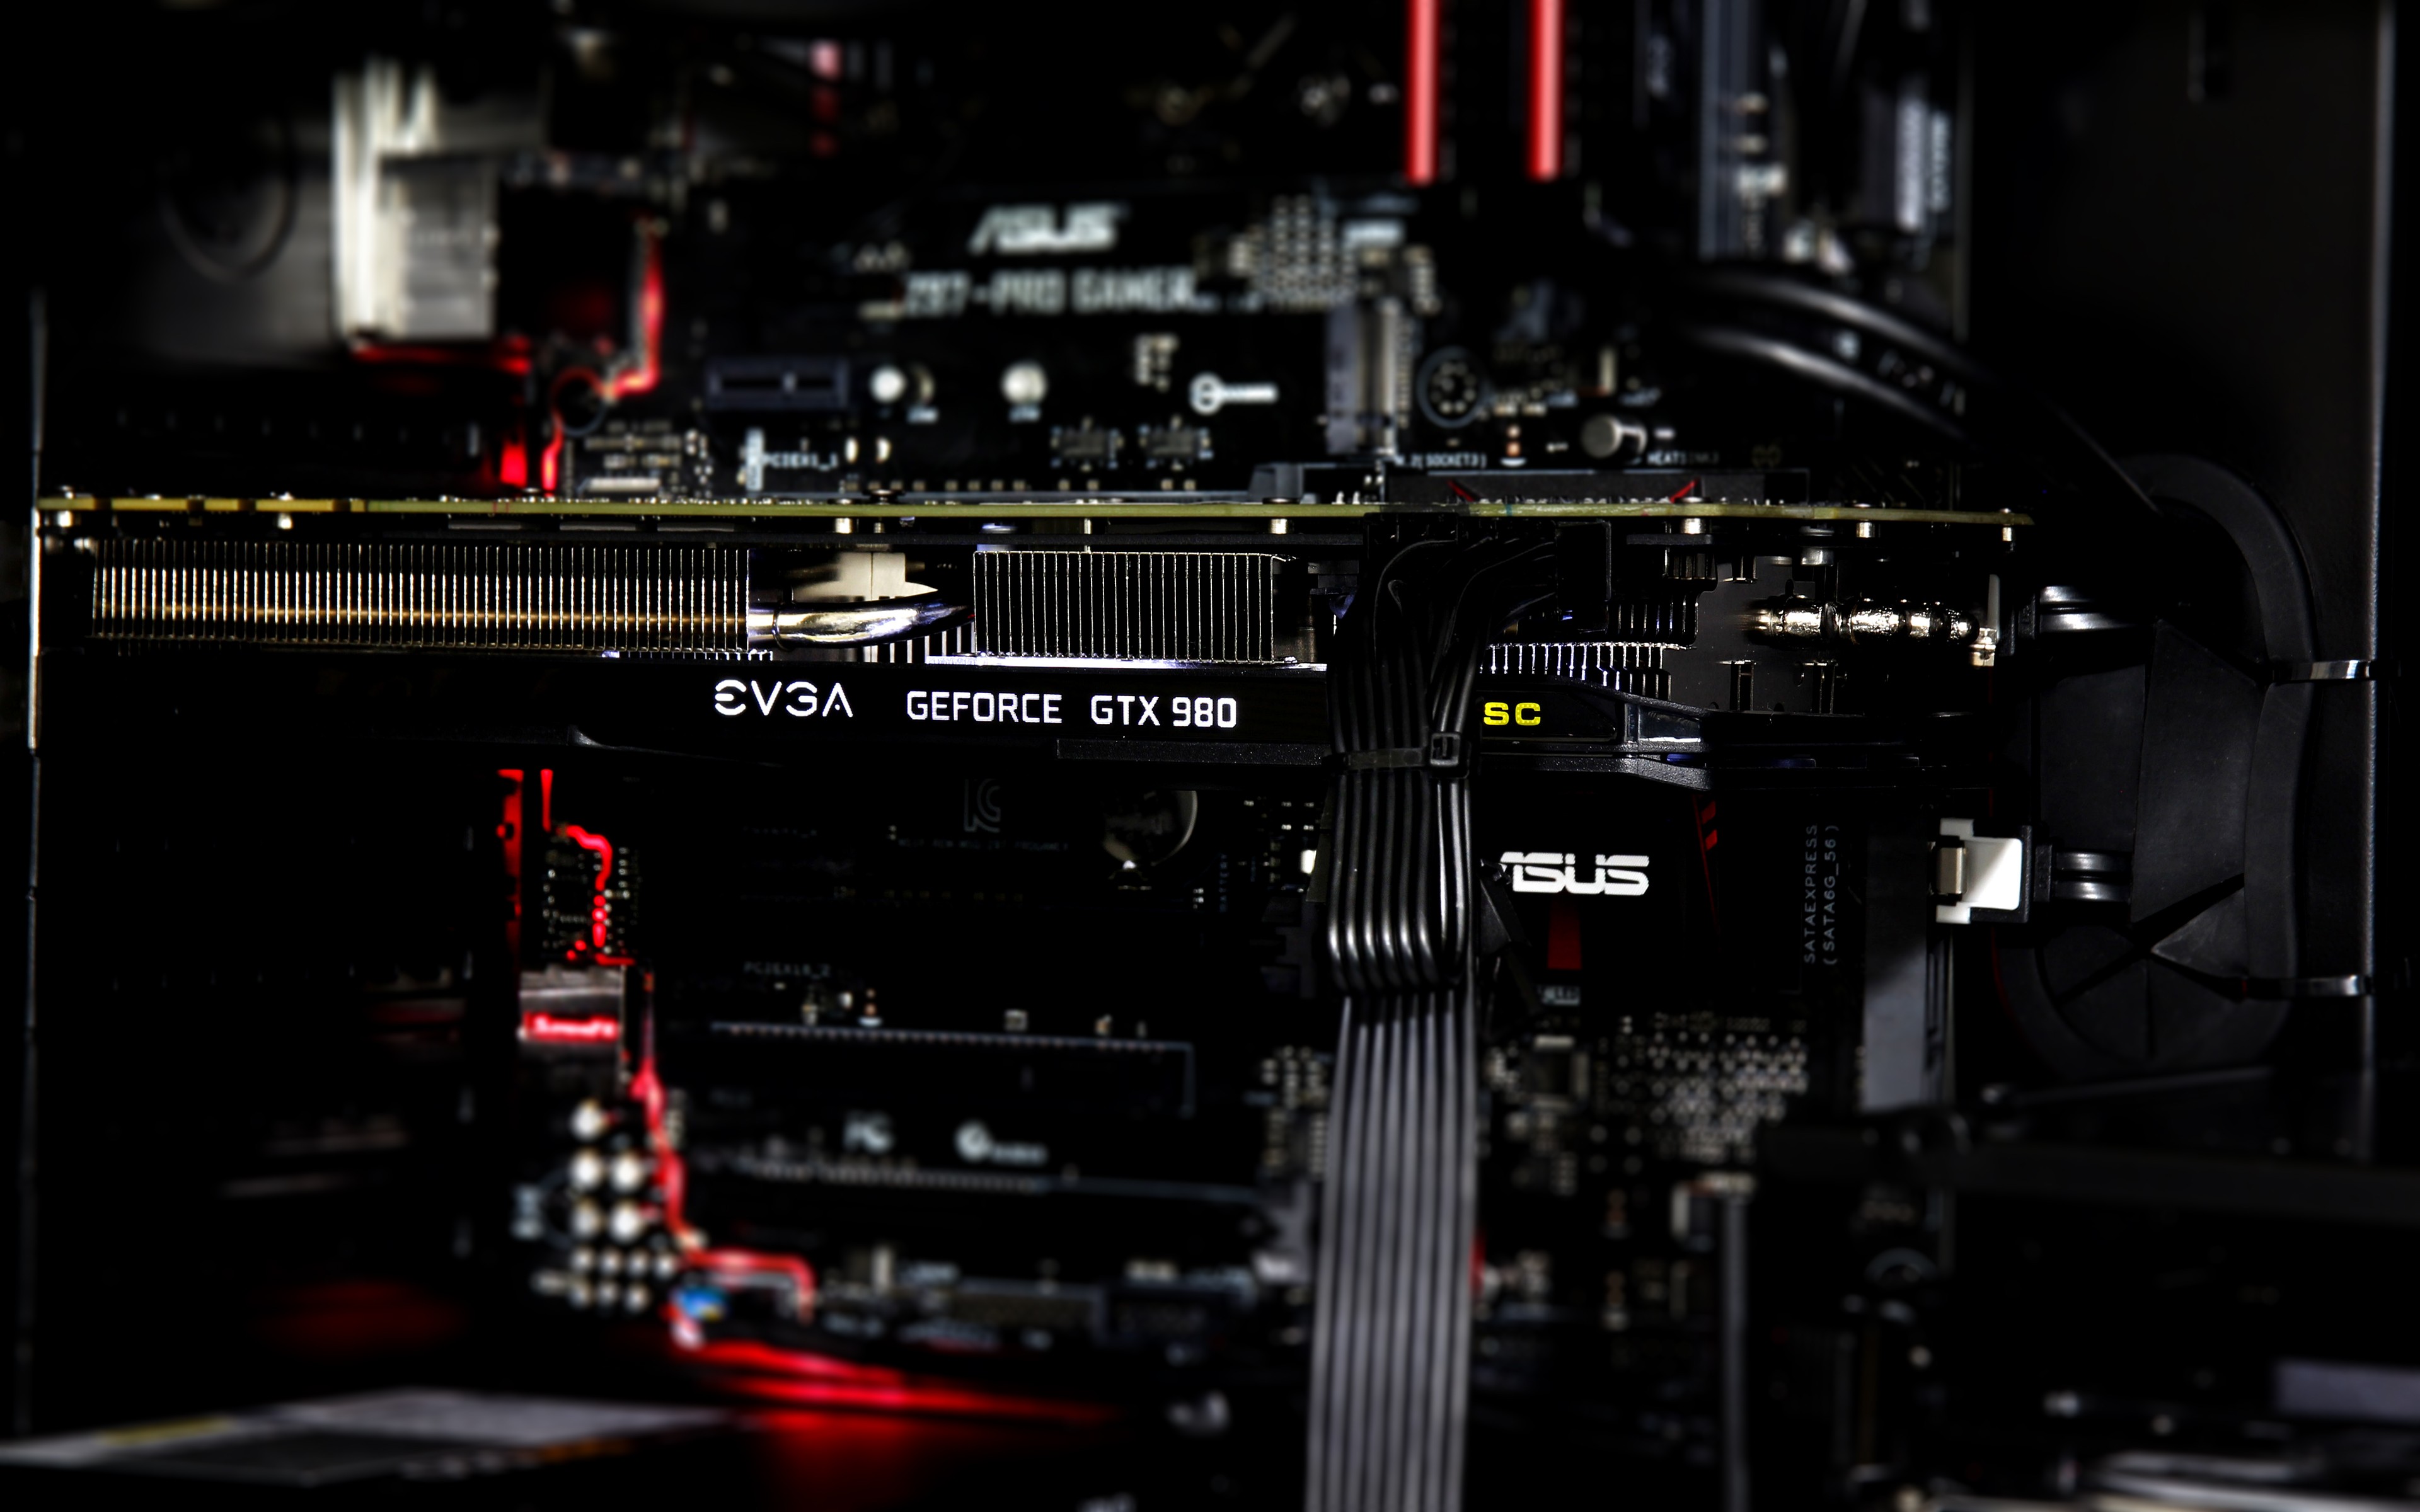 General 3840x2400 computer hardware GPUs graphics card GeForce EVGA ASUS PC gaming motherboards tilt shift technology GPU PCB PC build numbers